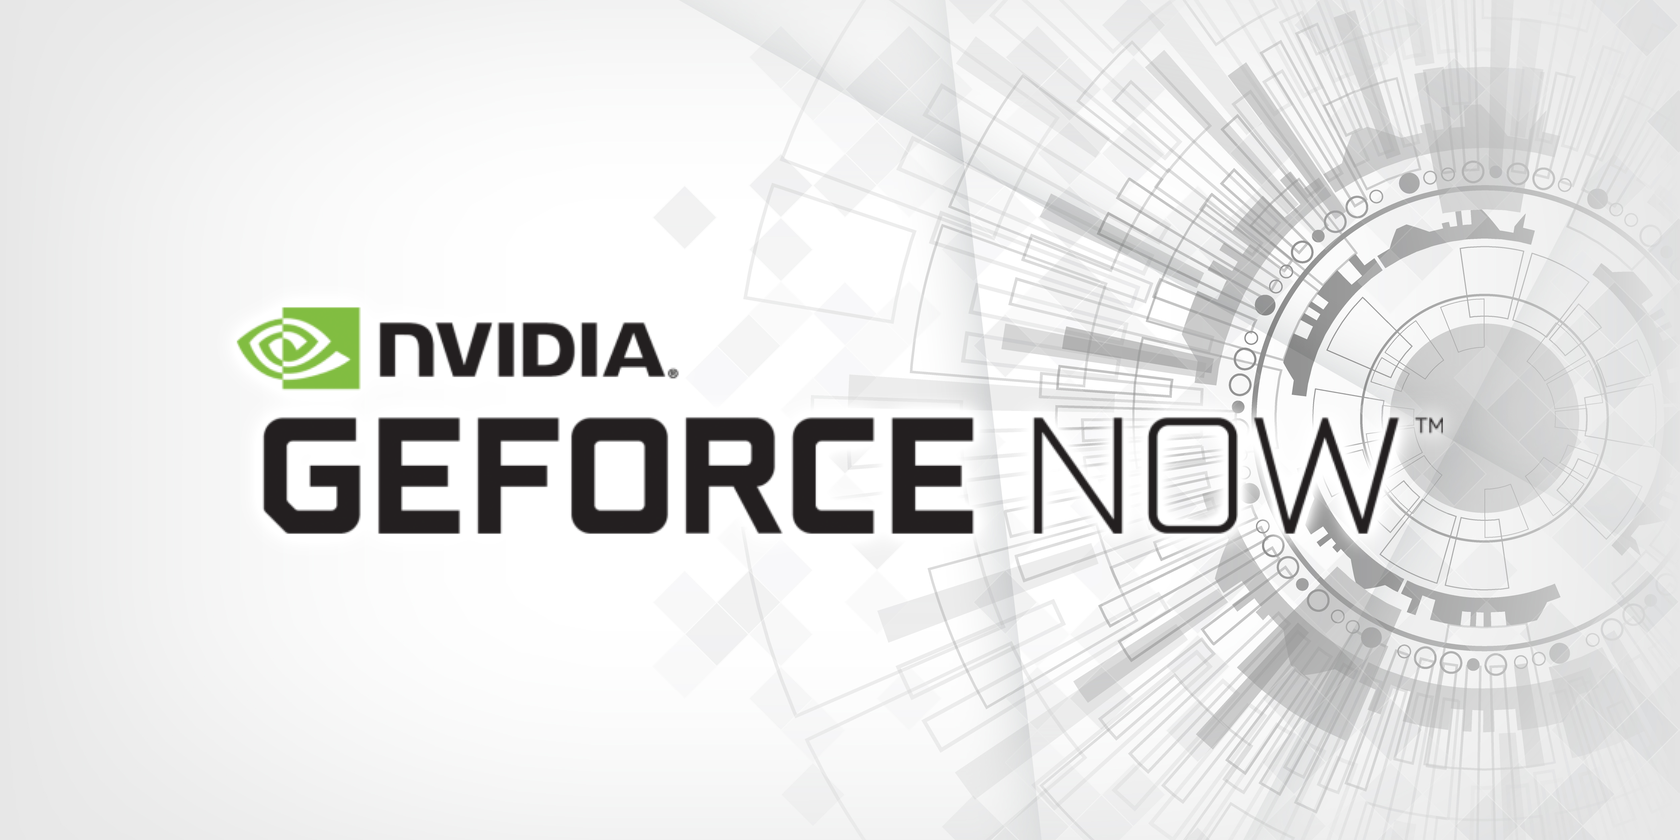 The GeForce Now Logo